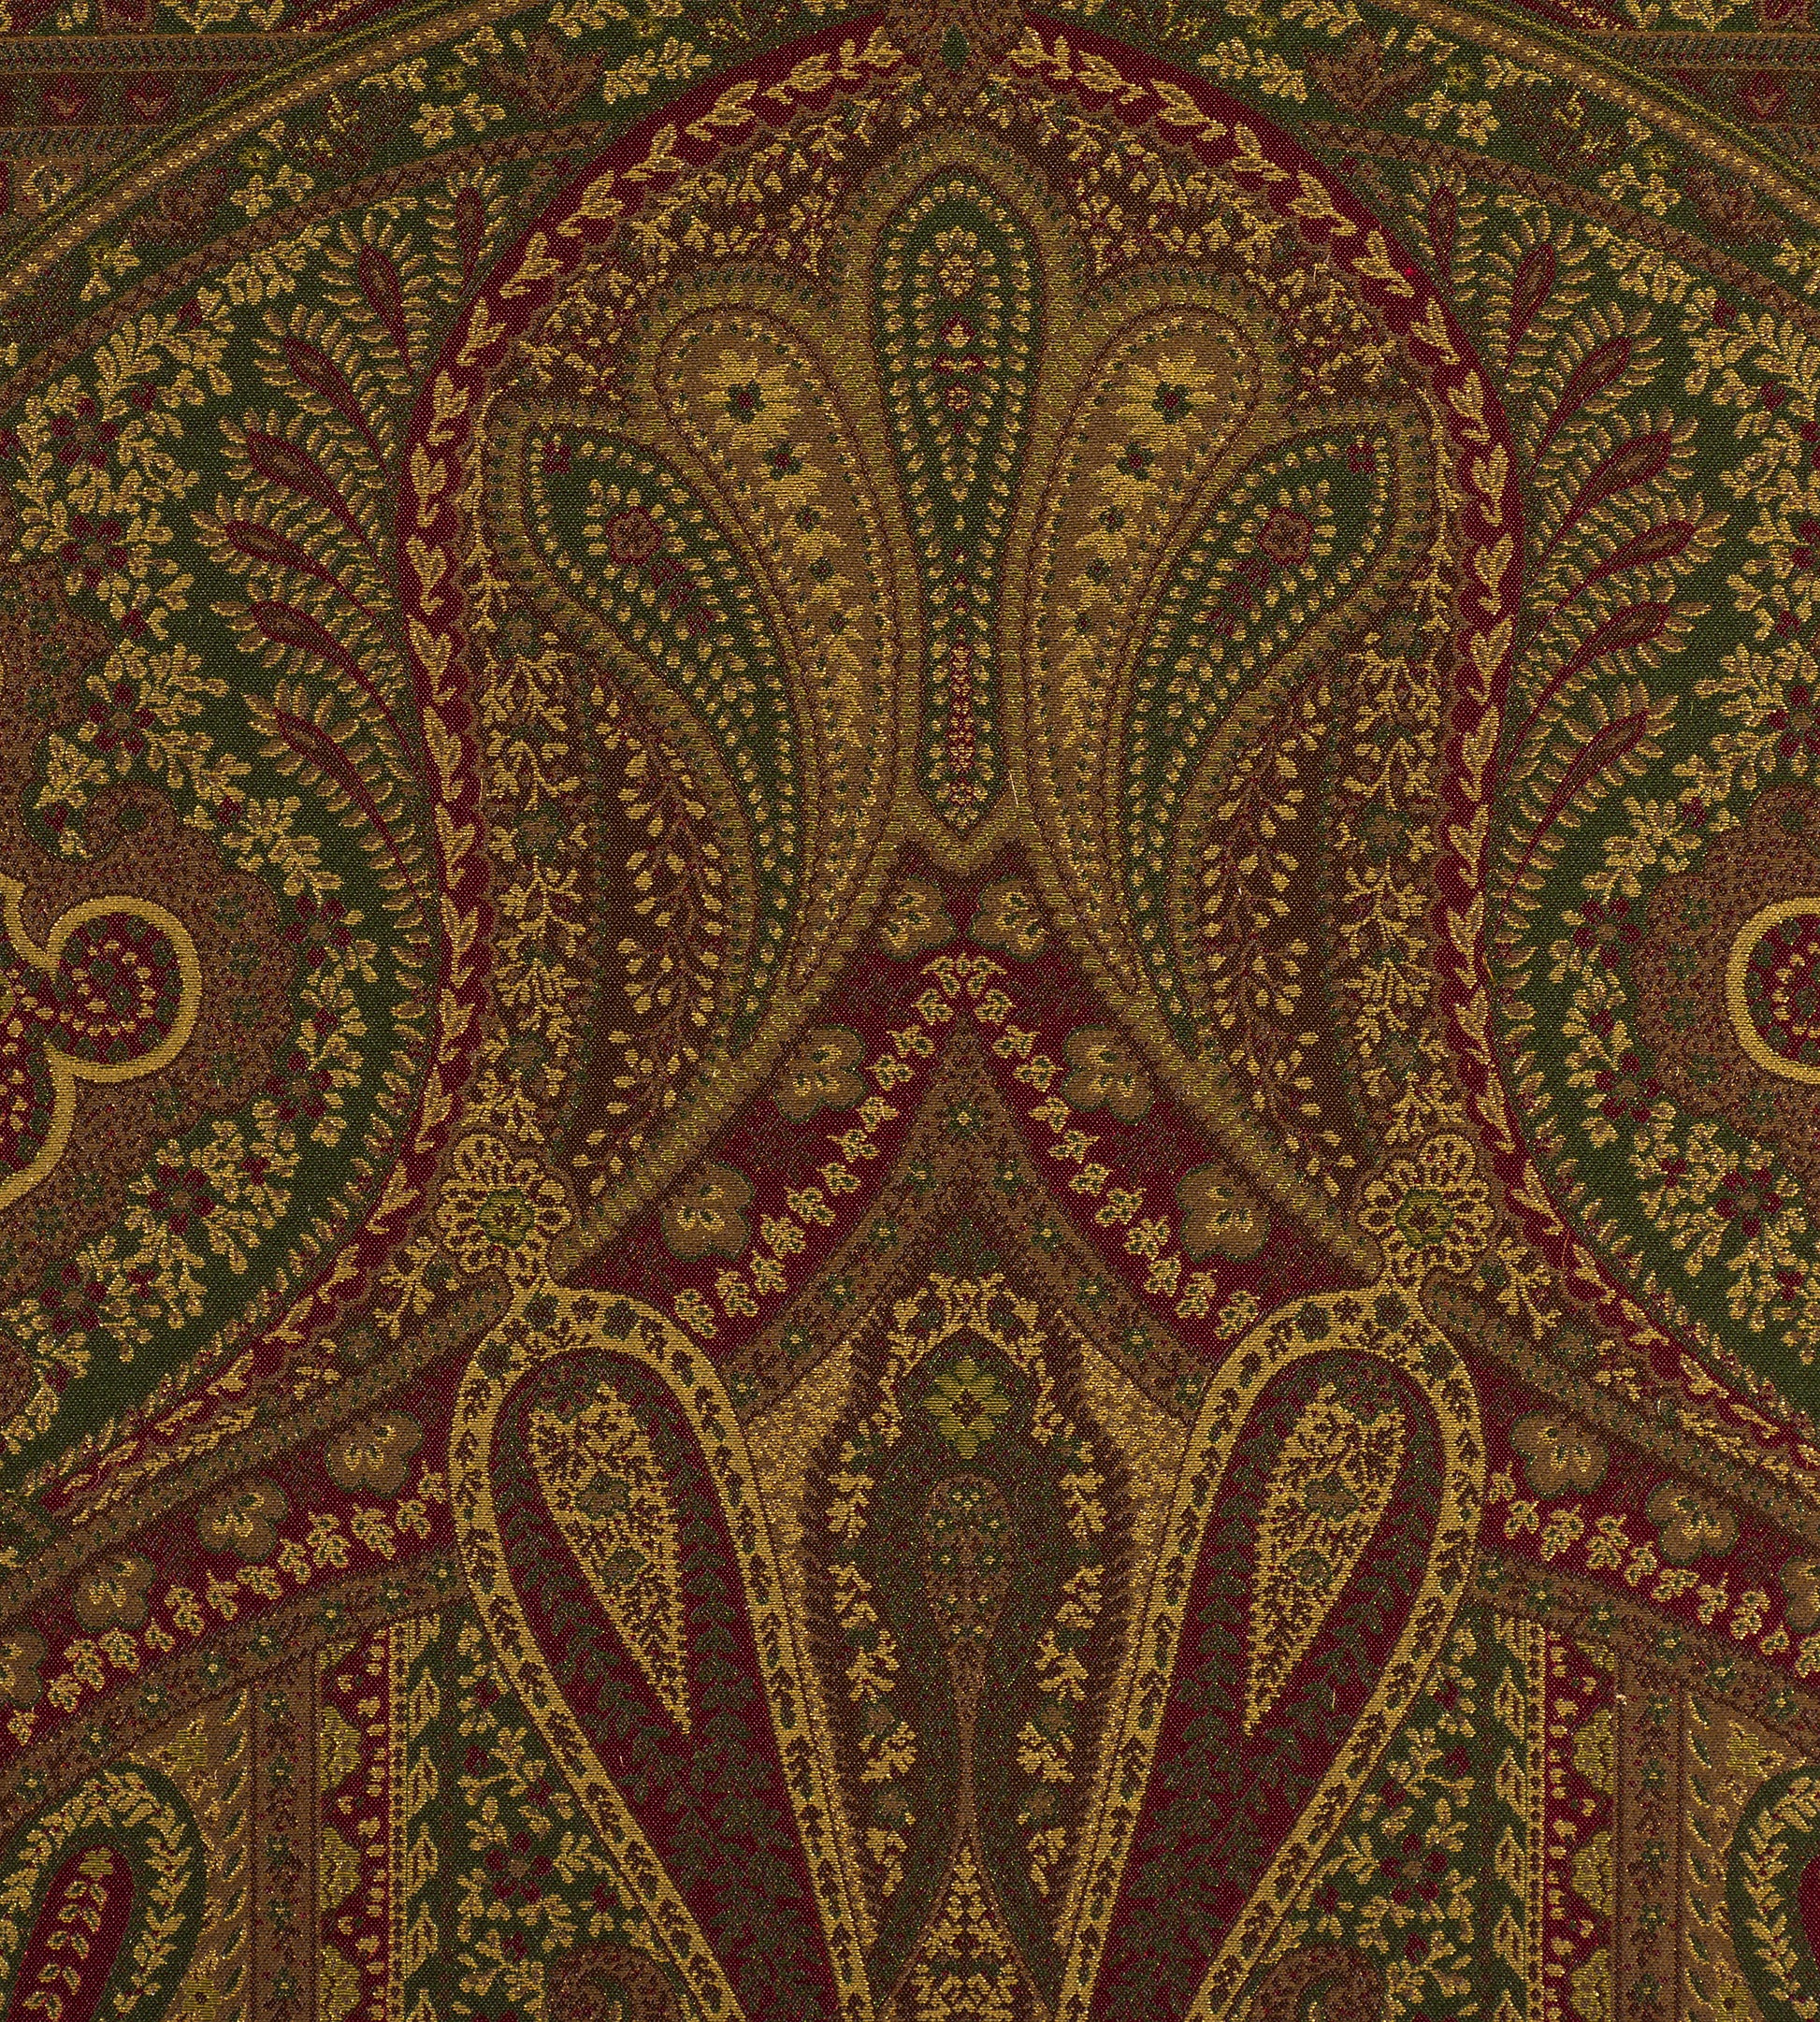 Purchase Old World Weavers Fabric Product SB 00960343, Cachemire Persiano Marrone 2